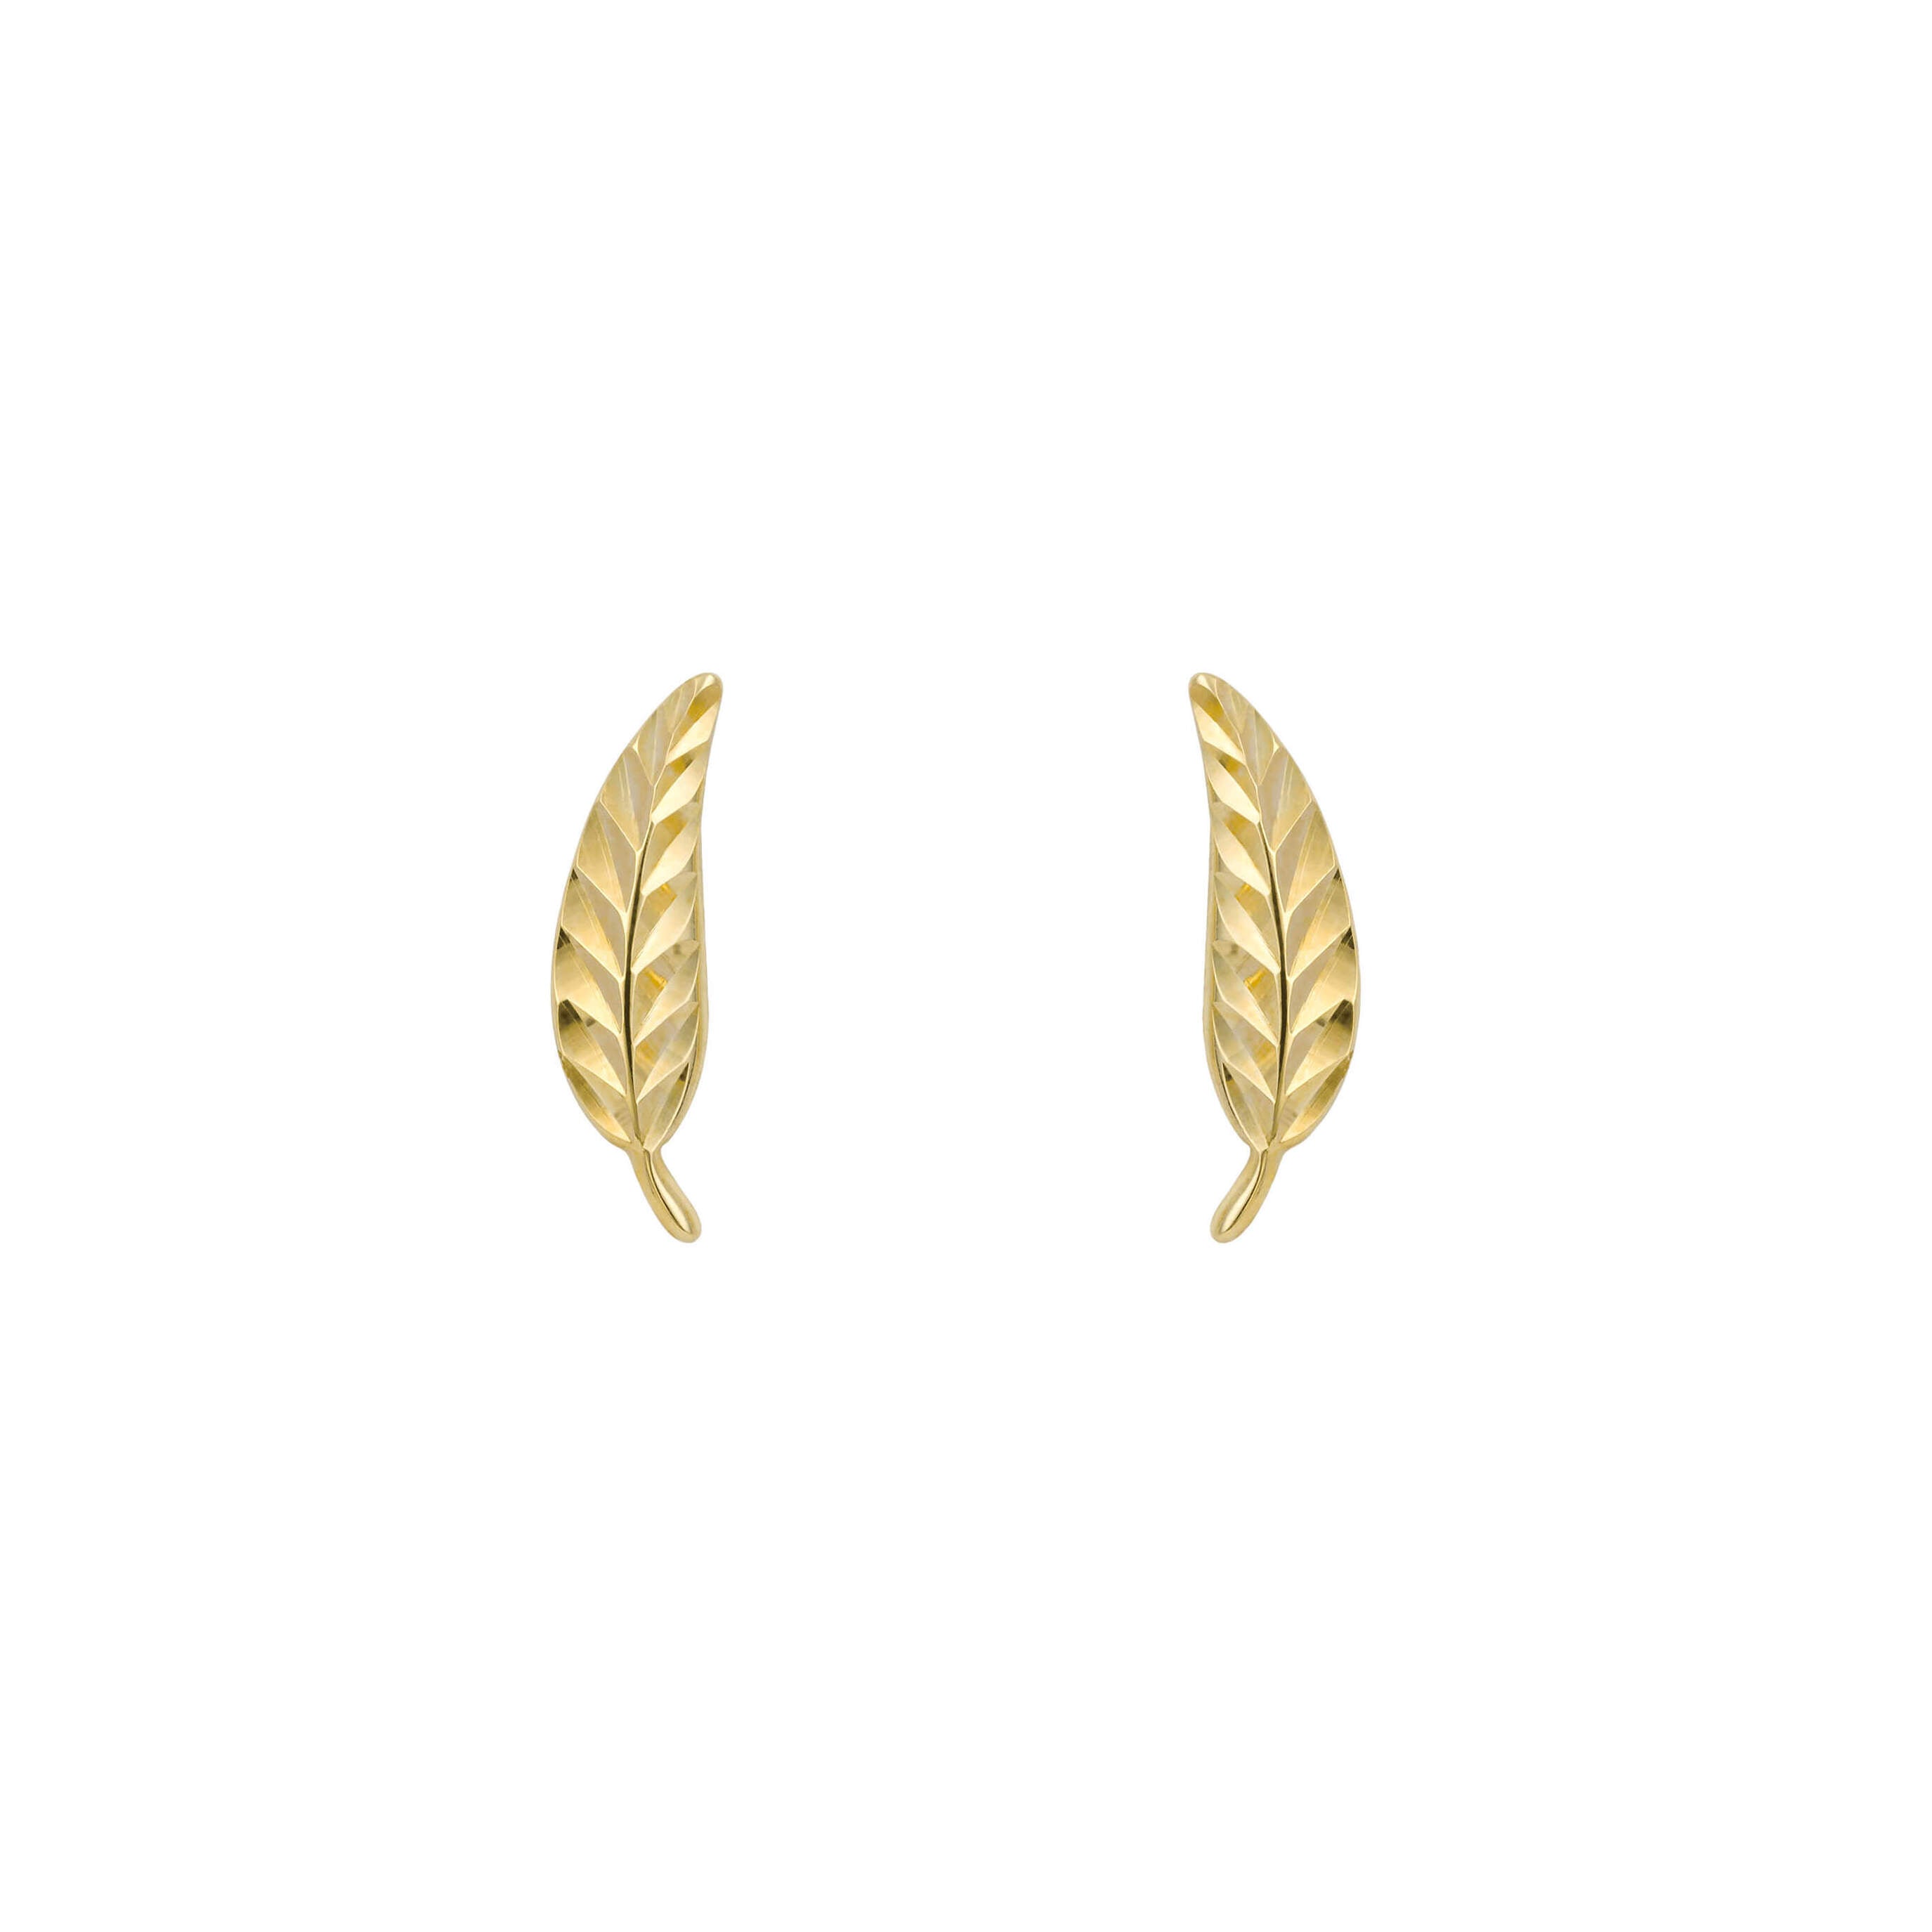 Feather Stud Earrings in 9ct Yellow Gold - Robert Anthony Jewellers, Edinburgh